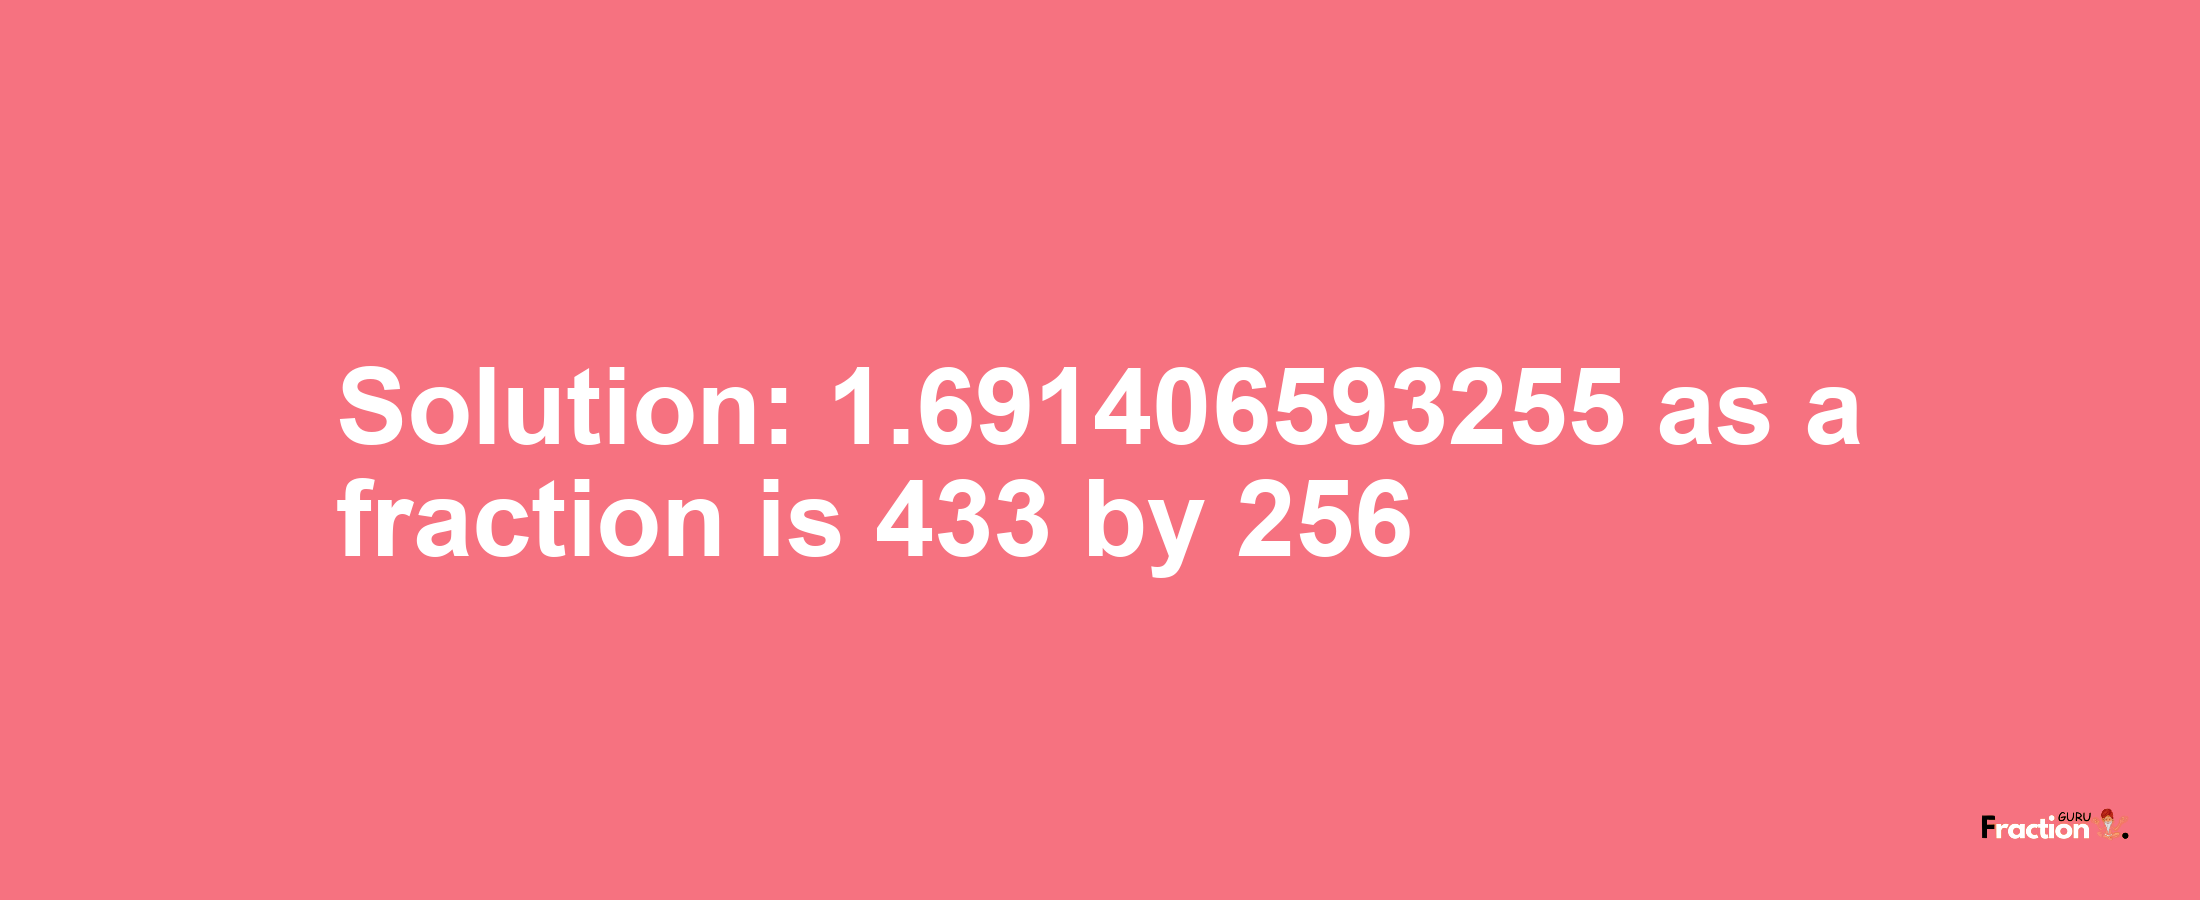 Solution:1.691406593255 as a fraction is 433/256